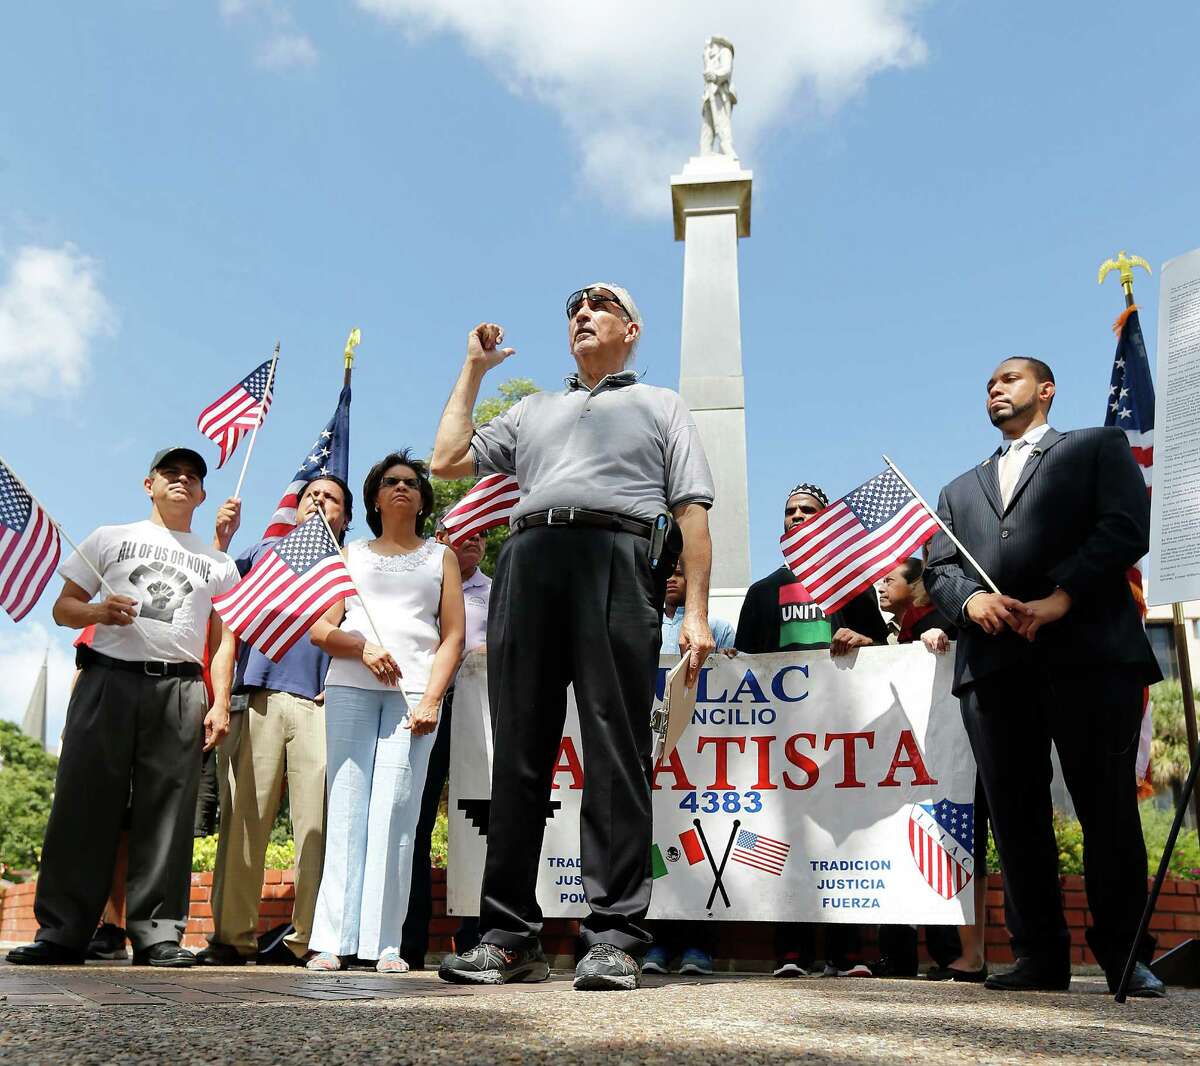 Mario Salas of San Antonio Coalition of Human and Civil Rights (center), Bexar County 4th Precinct Commissioner Tommy Calvert (right) and others gather for a press conference to demand the Confederate monument at Travis Park be removed in light of recent efforts by Bexar County officials to take down confederate symbols on public property. Since the park is on city property, the city council would have to vote and approve such a decision. Salas and Calvert hope to persuade their city officials to take such action. The monument has been at the park since 1899 which has a statue of a confederate soldier facing South and the words, "Our Confederate Dead" and "Lest we forget" engraved on the monument. (Kin Man Hui/San Antonio Express-News)